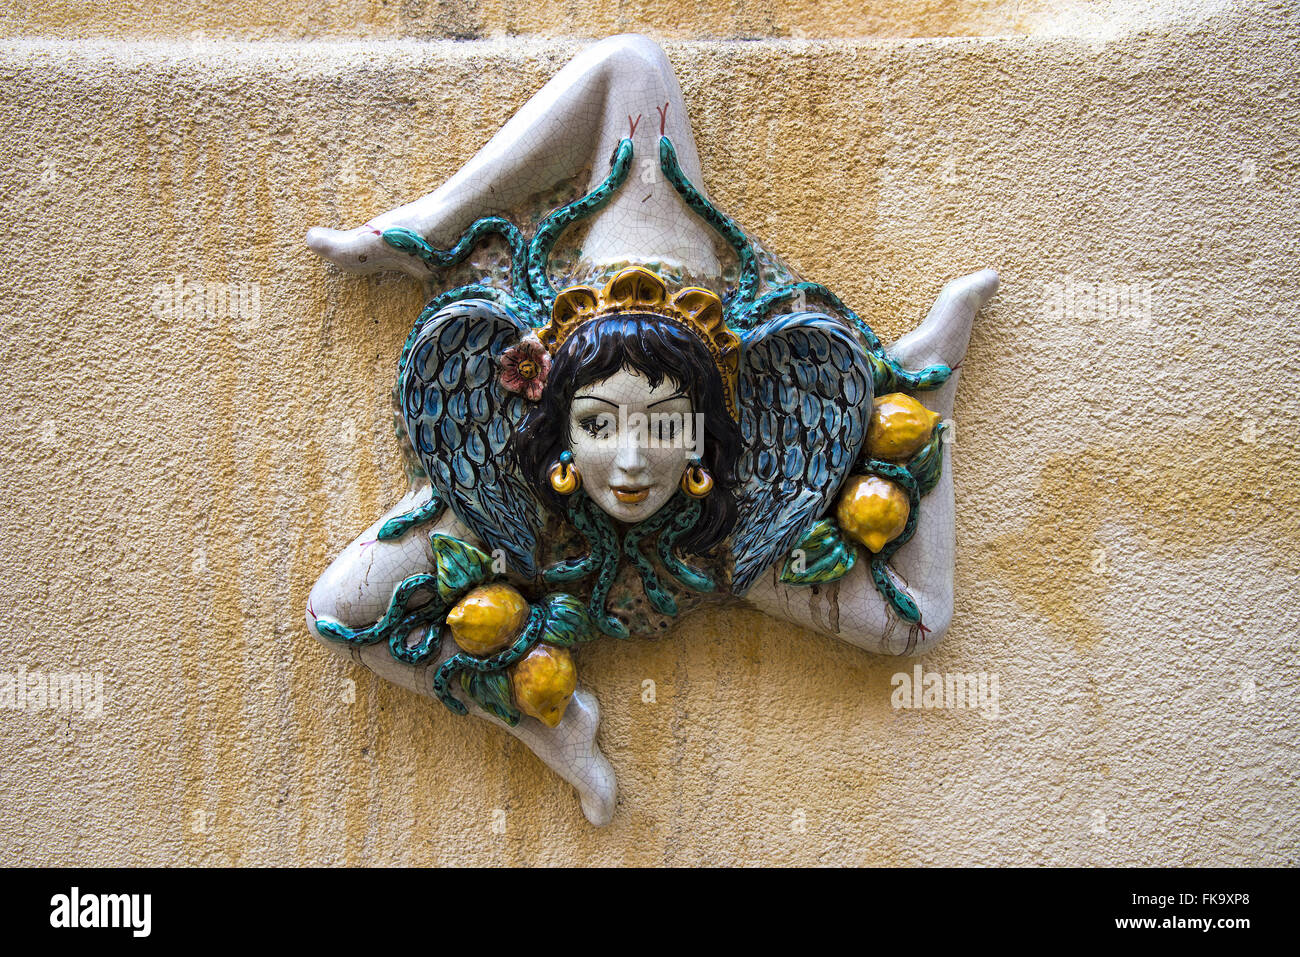 Image of a Triscele with this Medusa head on the flag of Sicily Stock Photo